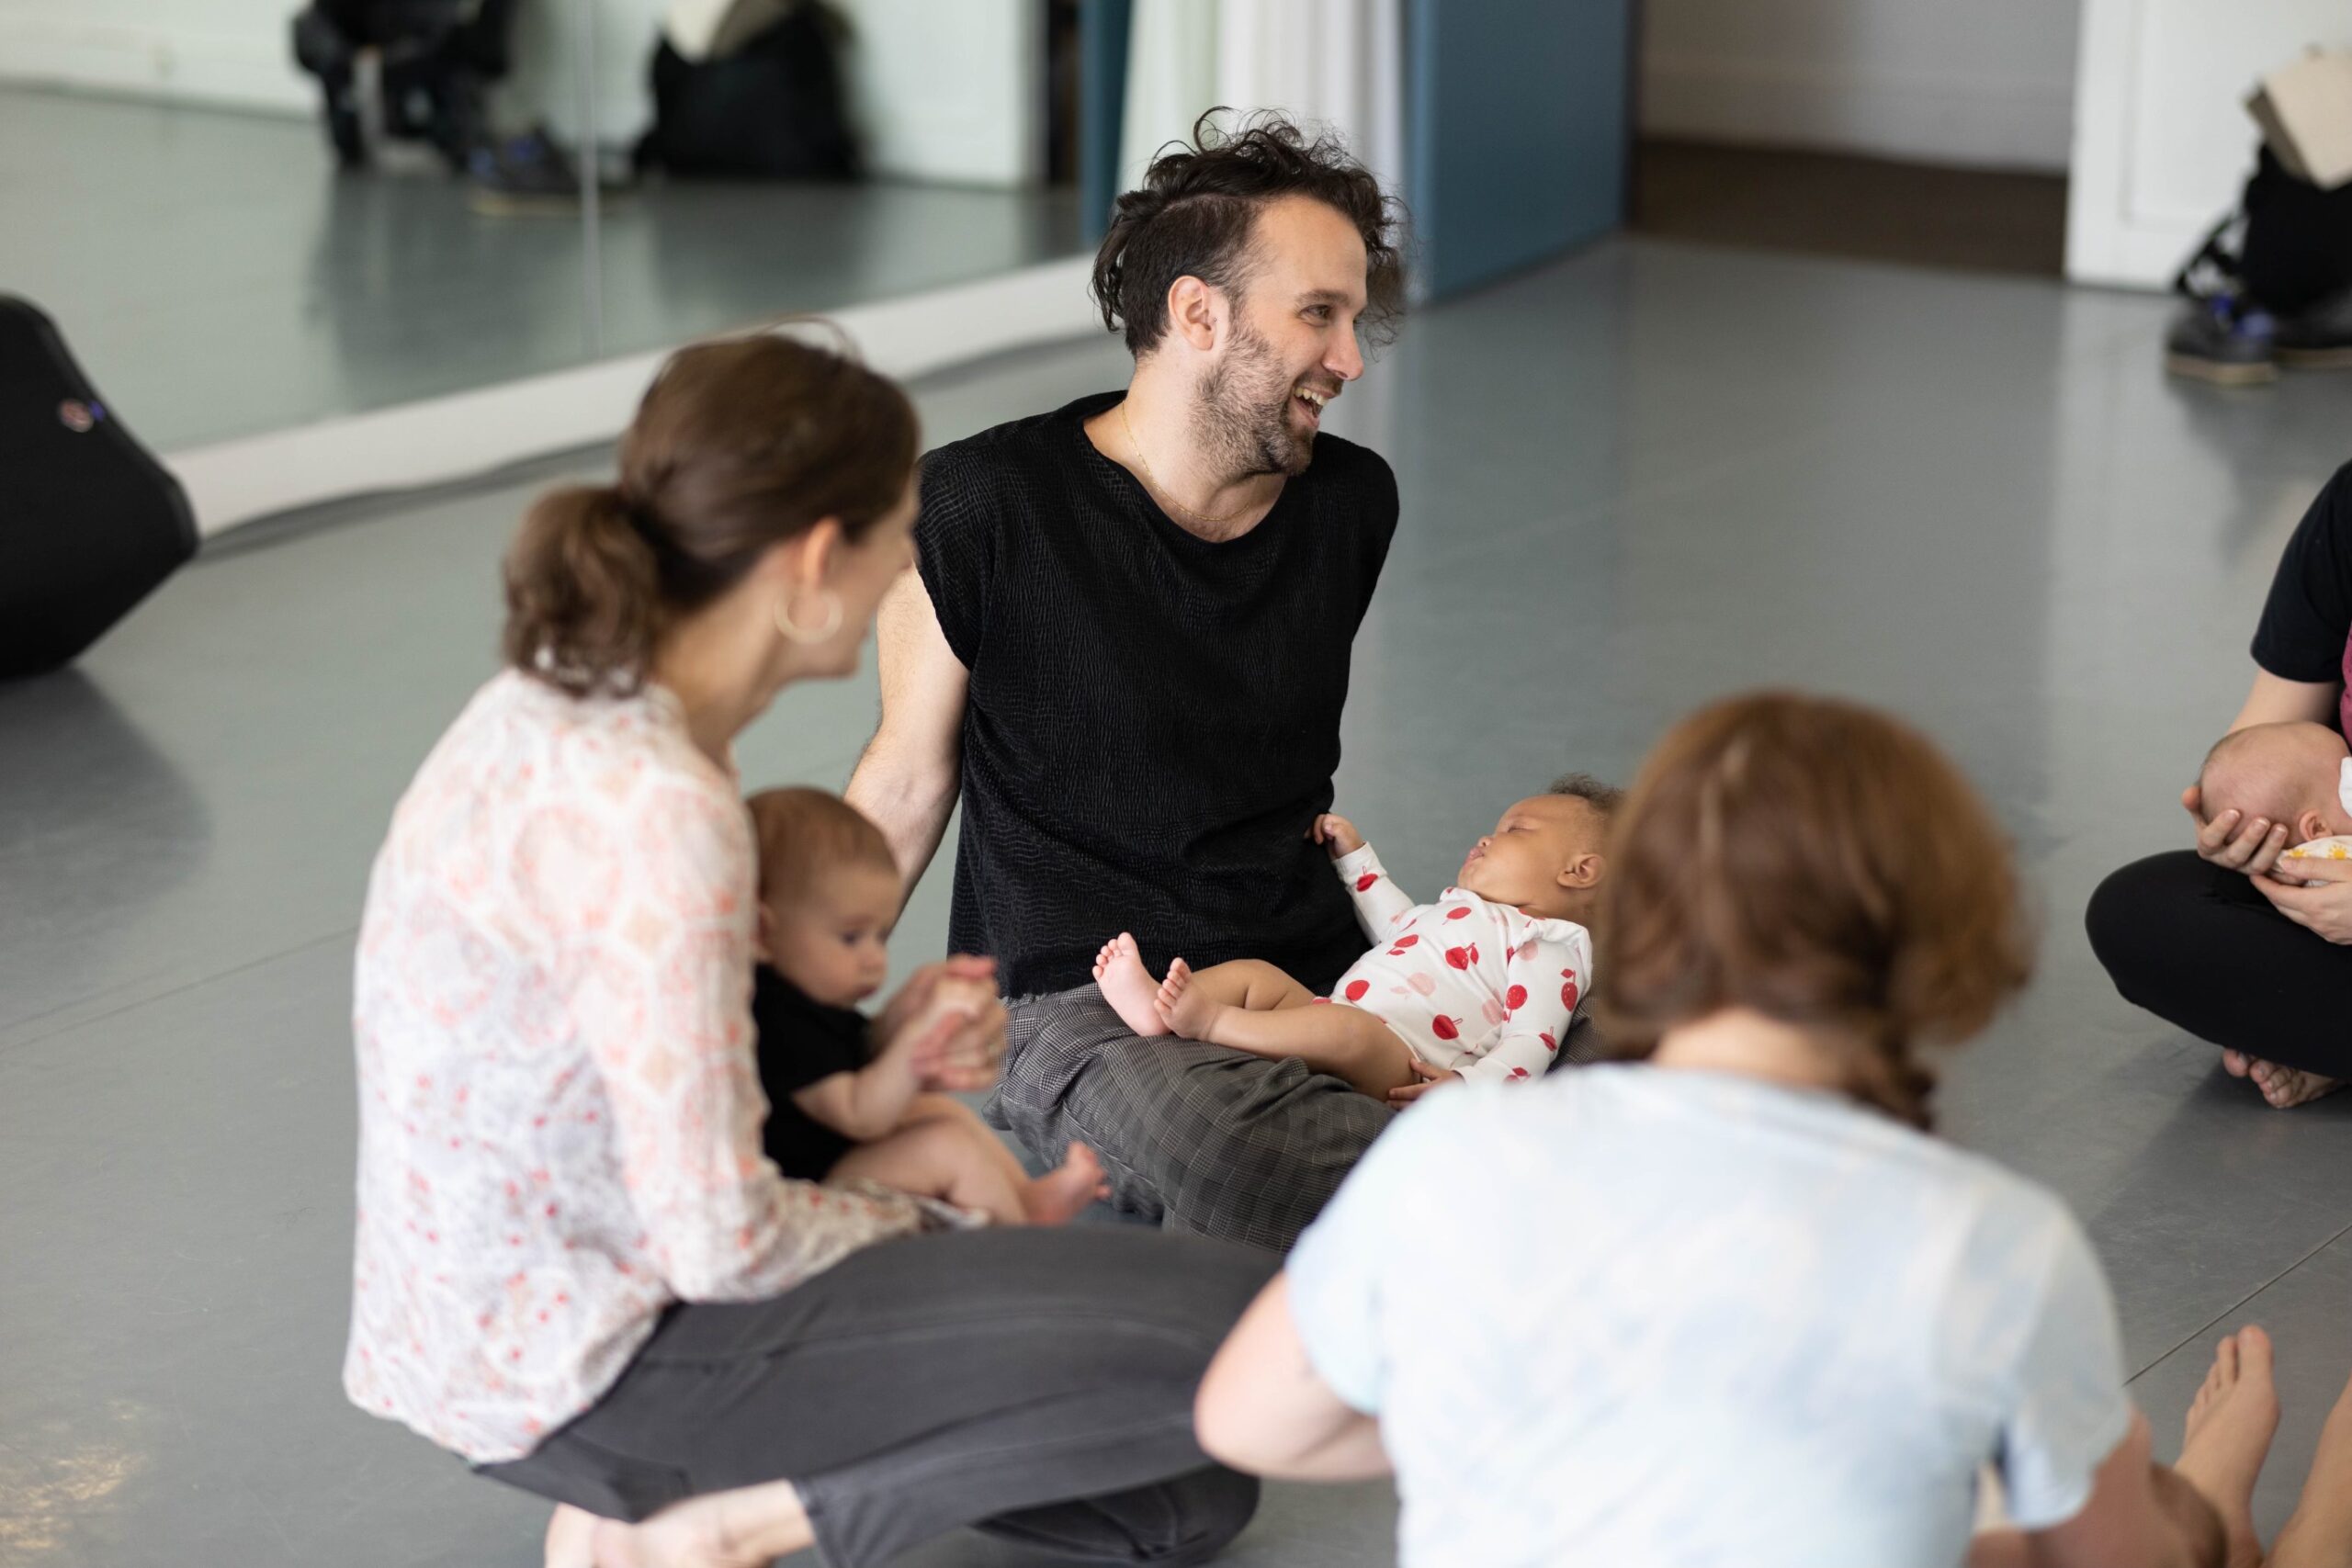 Four people of light skin tone sitting in a dance studio with babies in their laps.